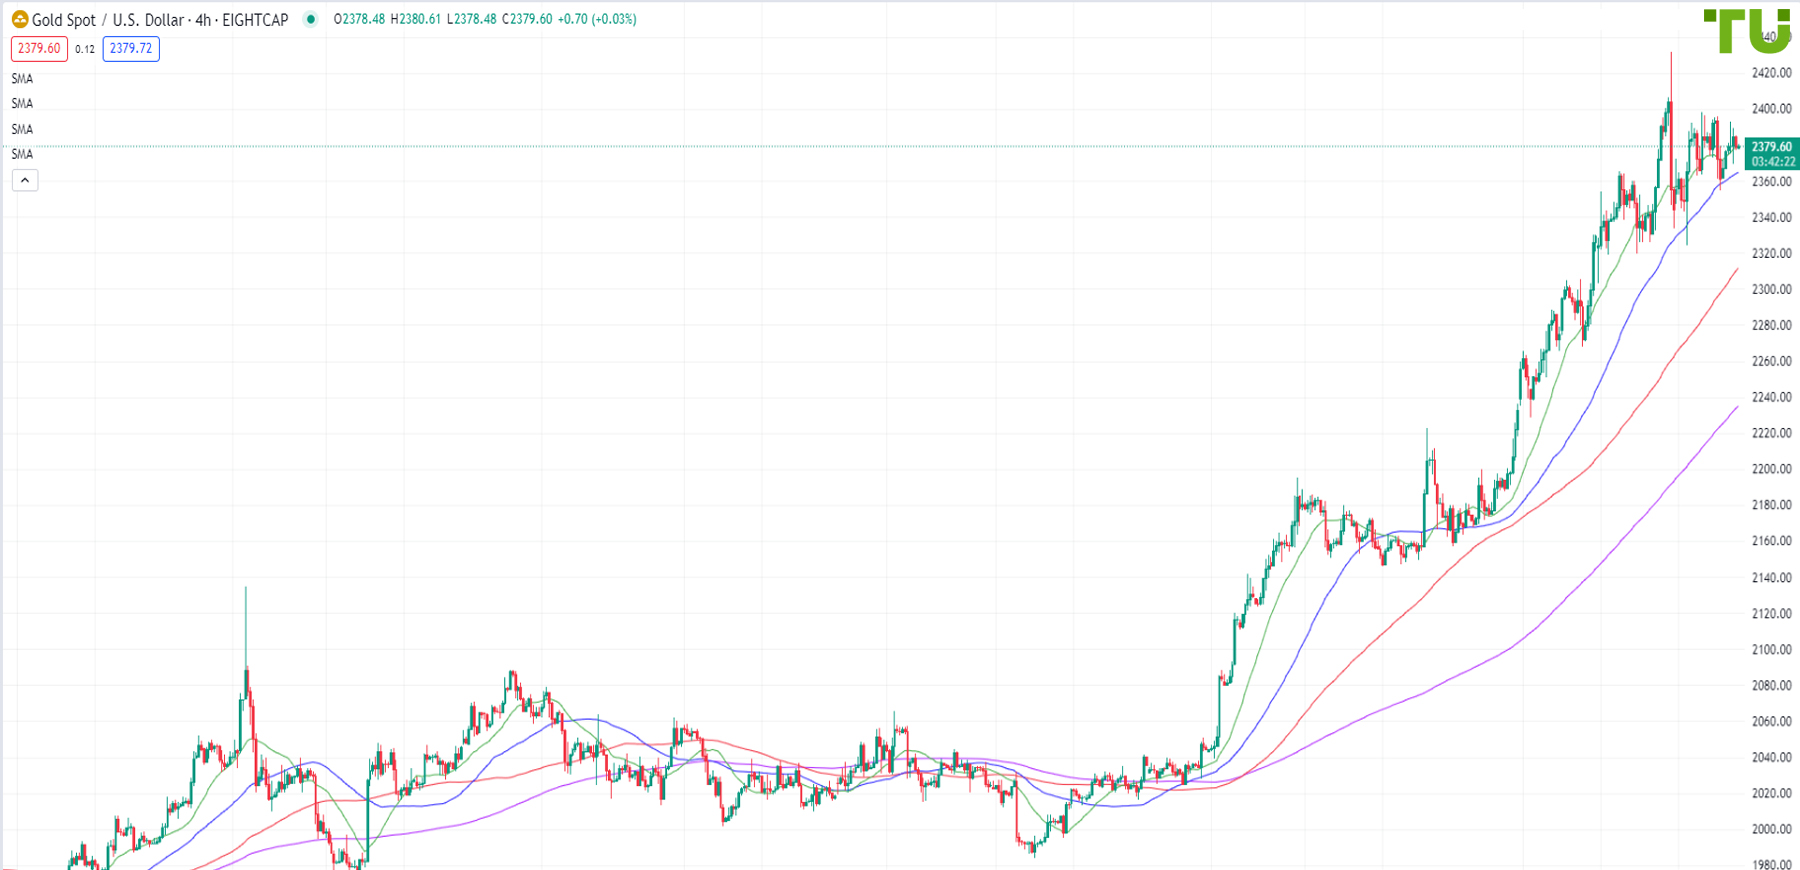 XAU/USD is consolidating at ,395 resistance 